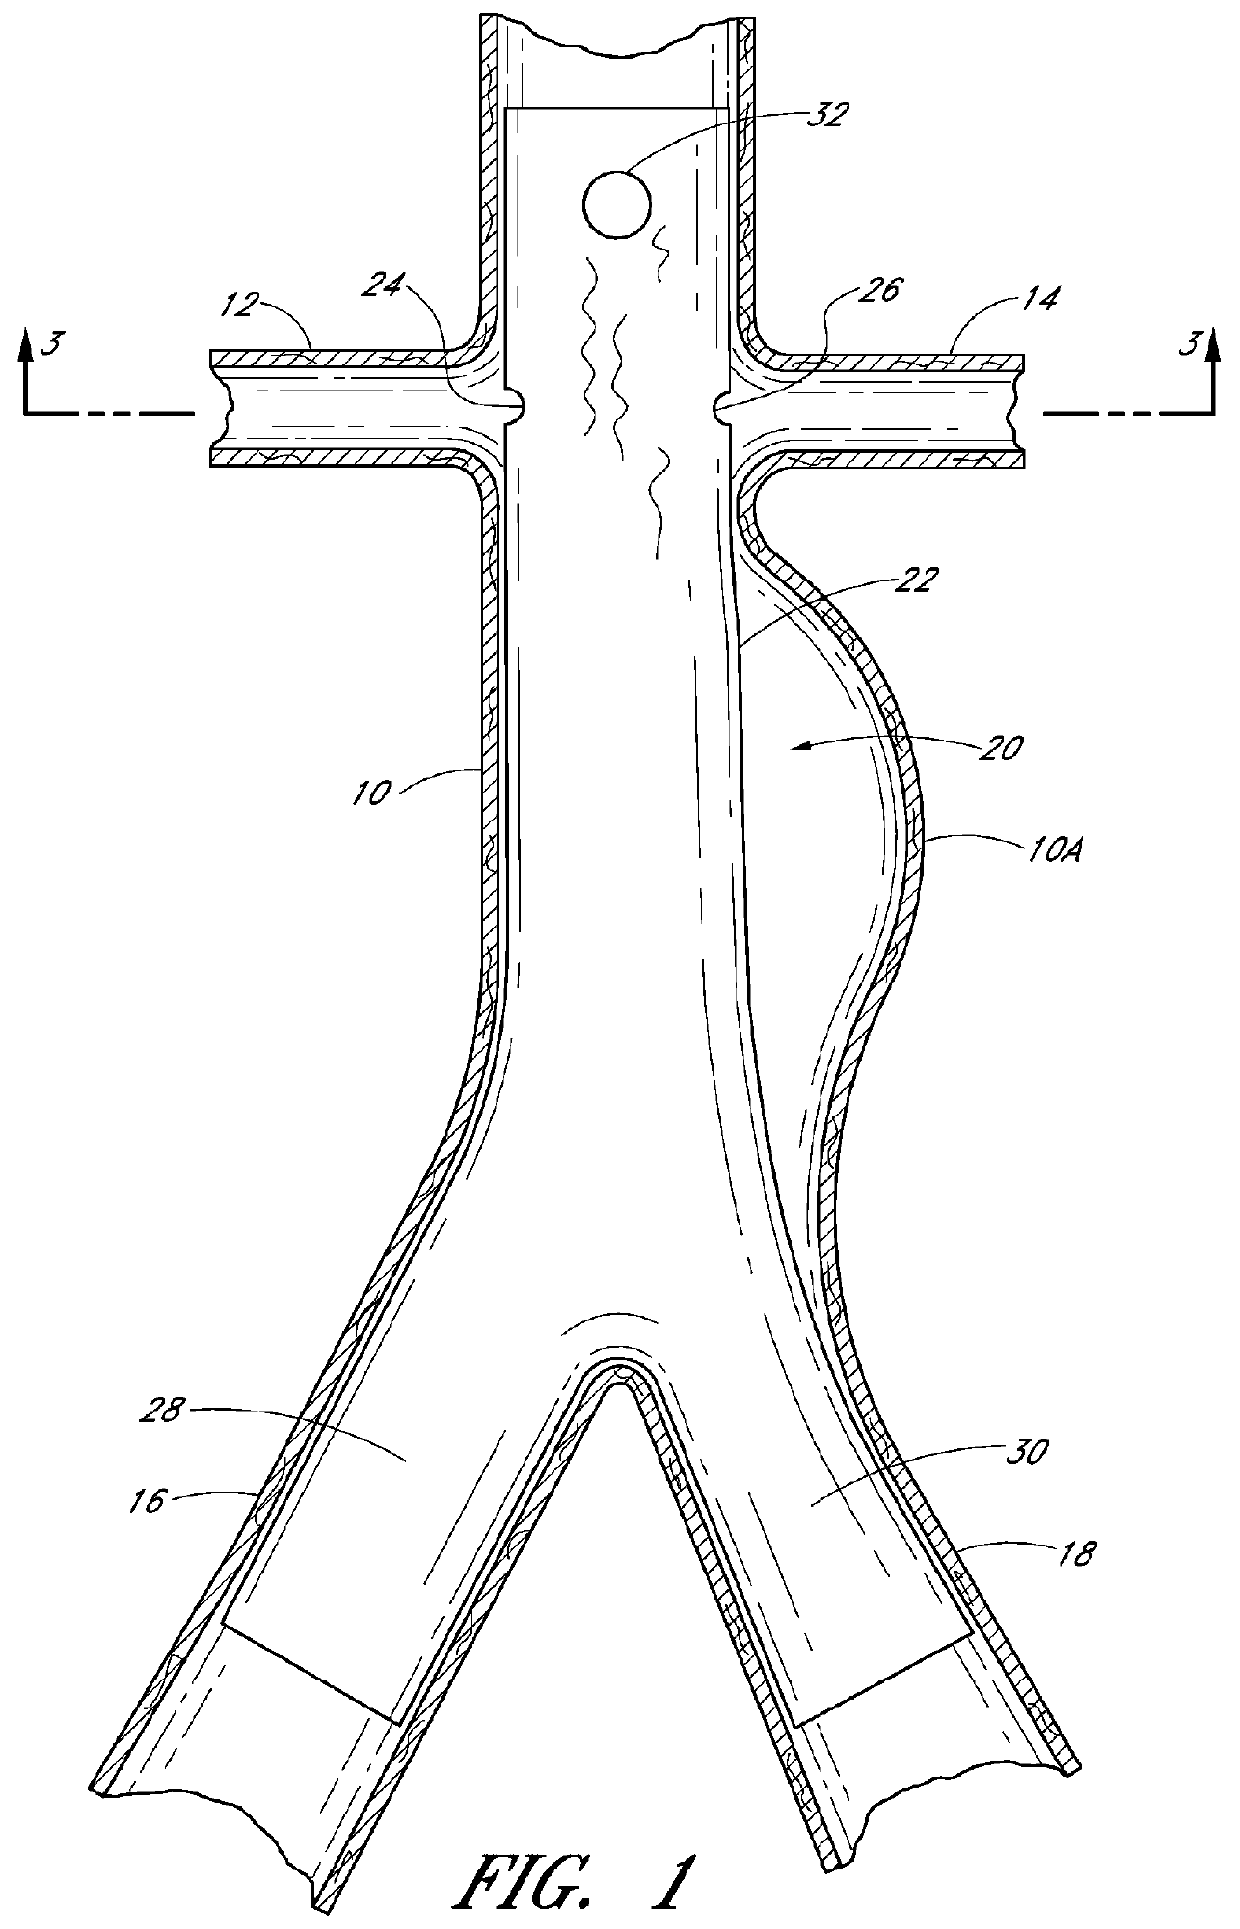 Apparatus and method of placement of a graft or graft system